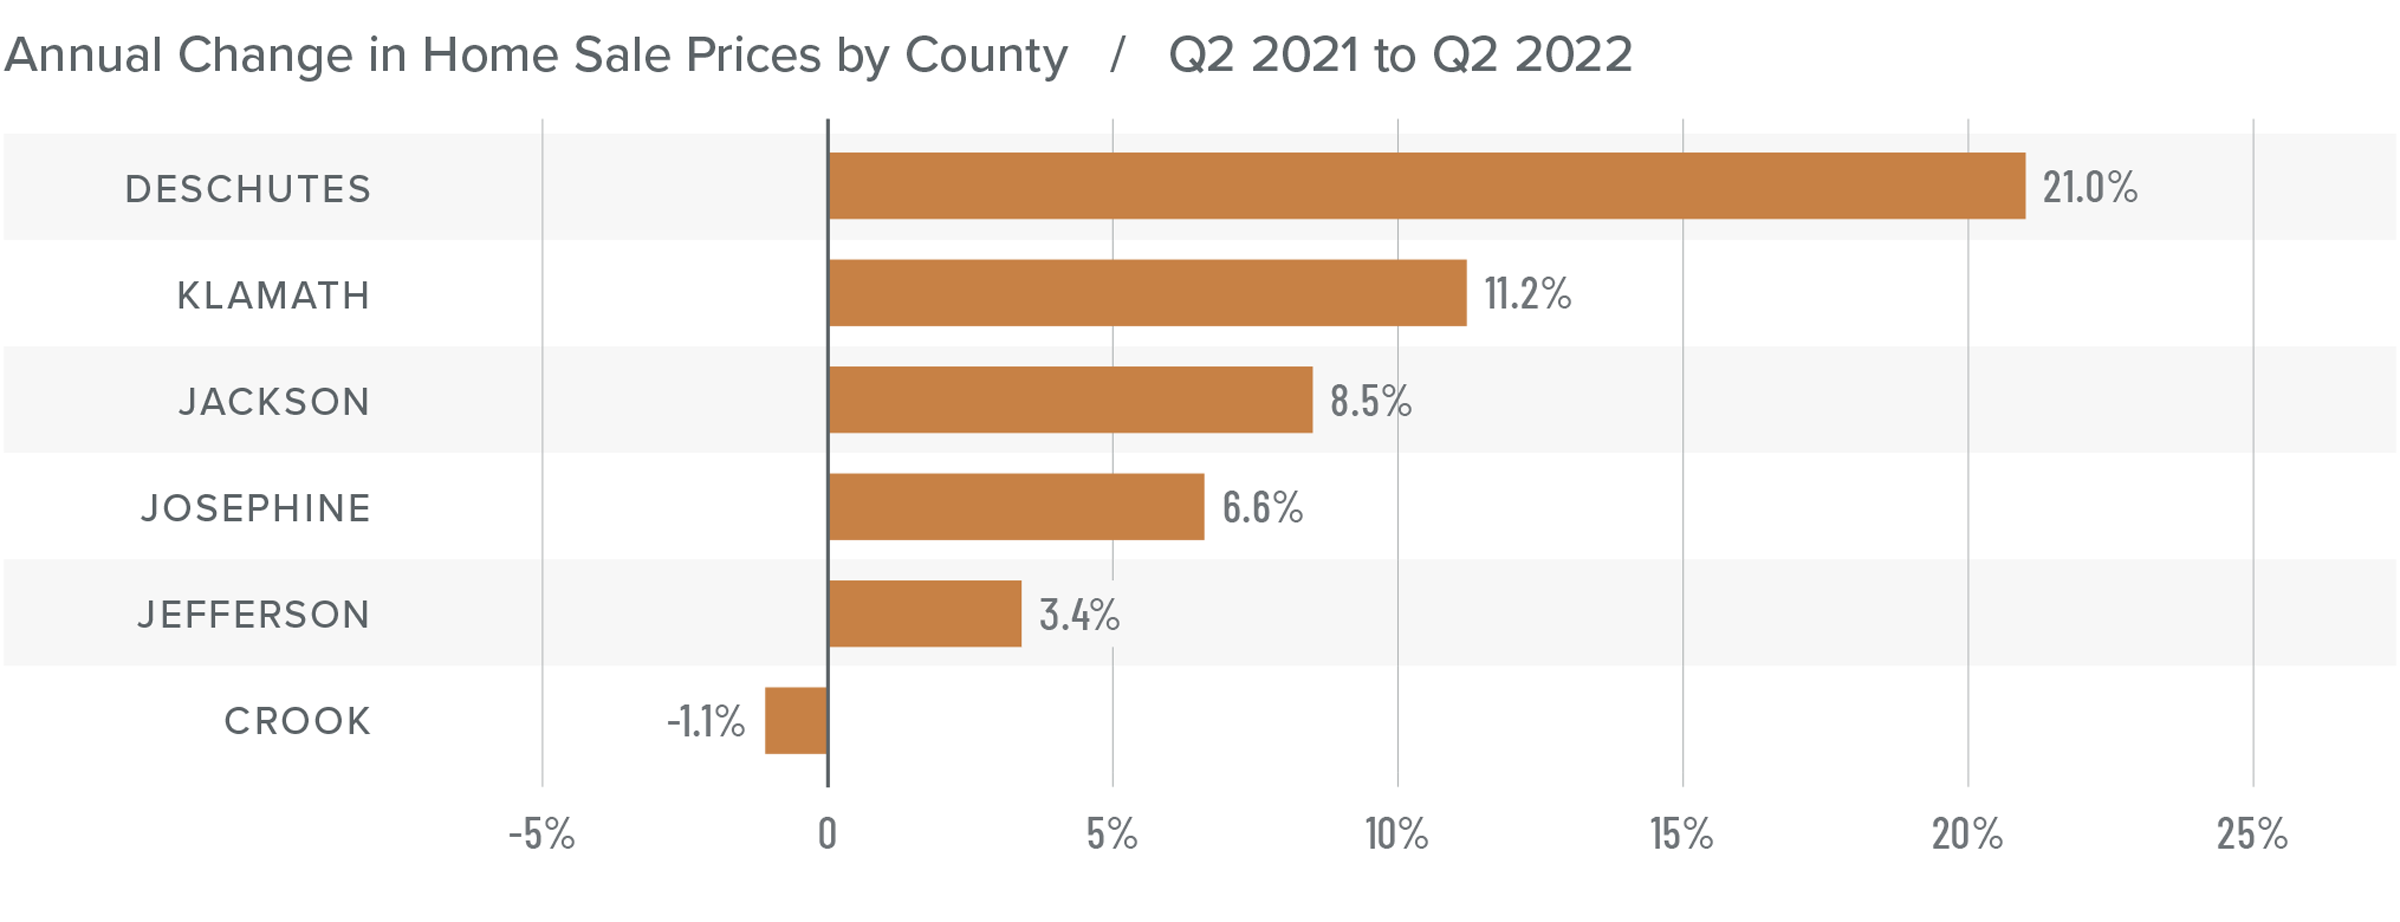 A bar graph showing the annual change in home sale prices for various counties in Central and Southern Oregon from Q2 2021 to Q2 2022. Deschutes county tops the list at 21%, followed by Klamath at 11.2%, Jackson at 8.5%, Josephine at 6.6%, Jefferson at 3.4%, and finally Crook County at -1.1%.